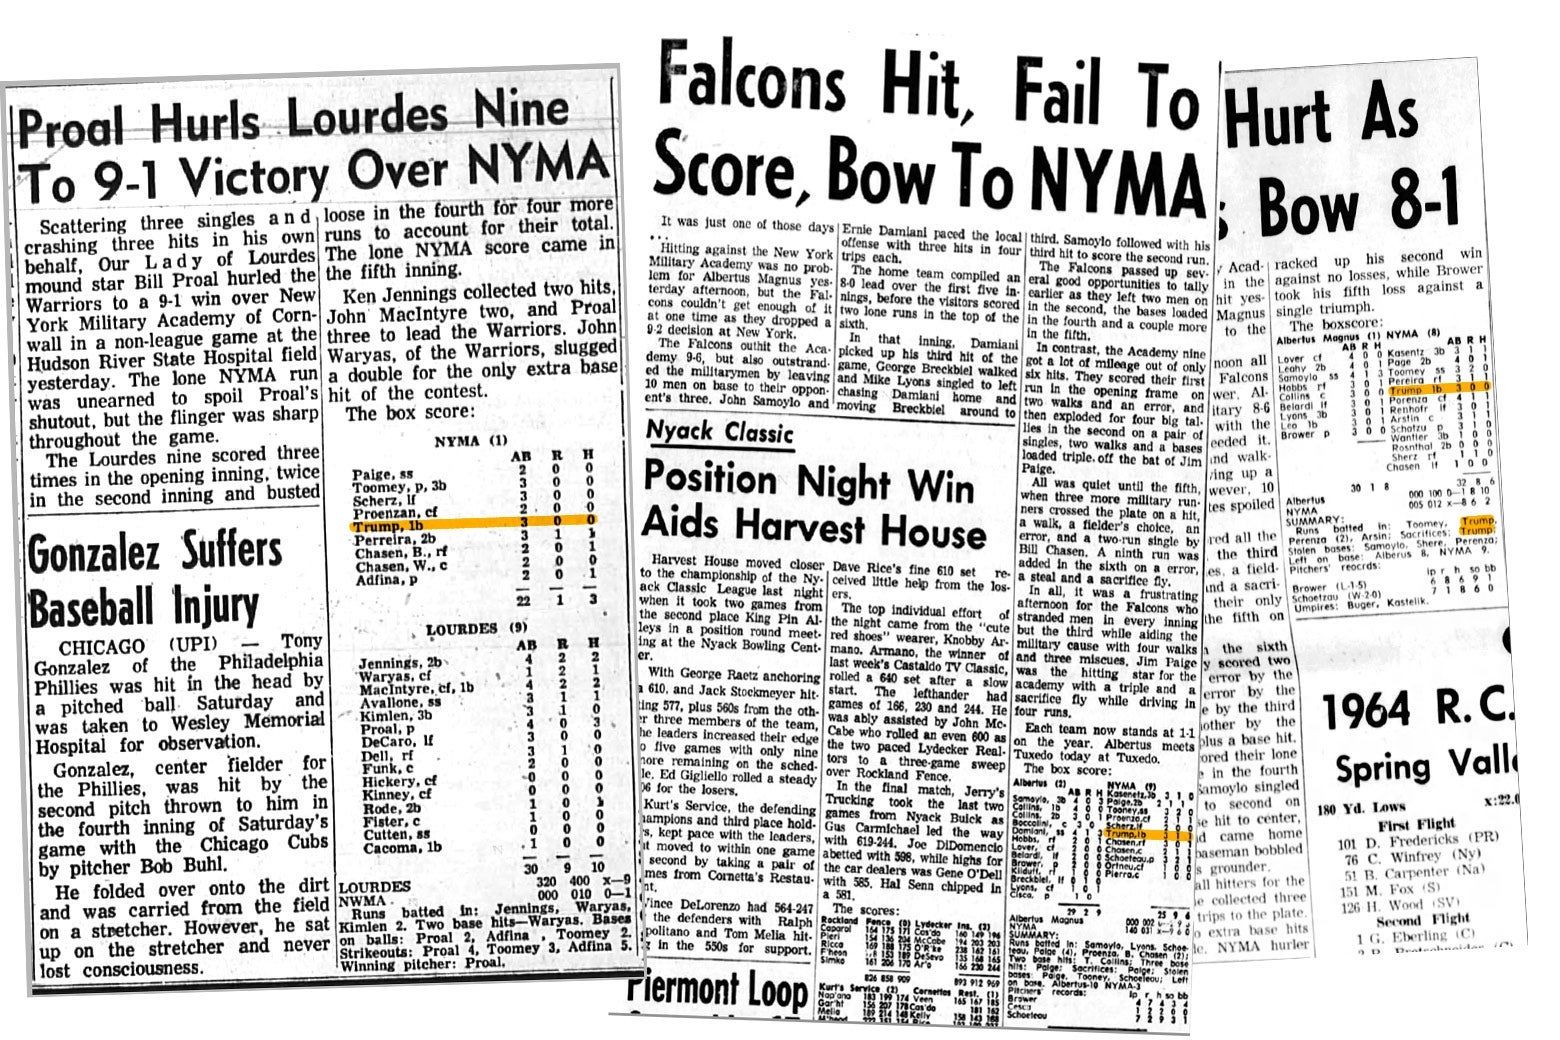 Newspaper box score clippings from when Trump played baseball at NYMA.